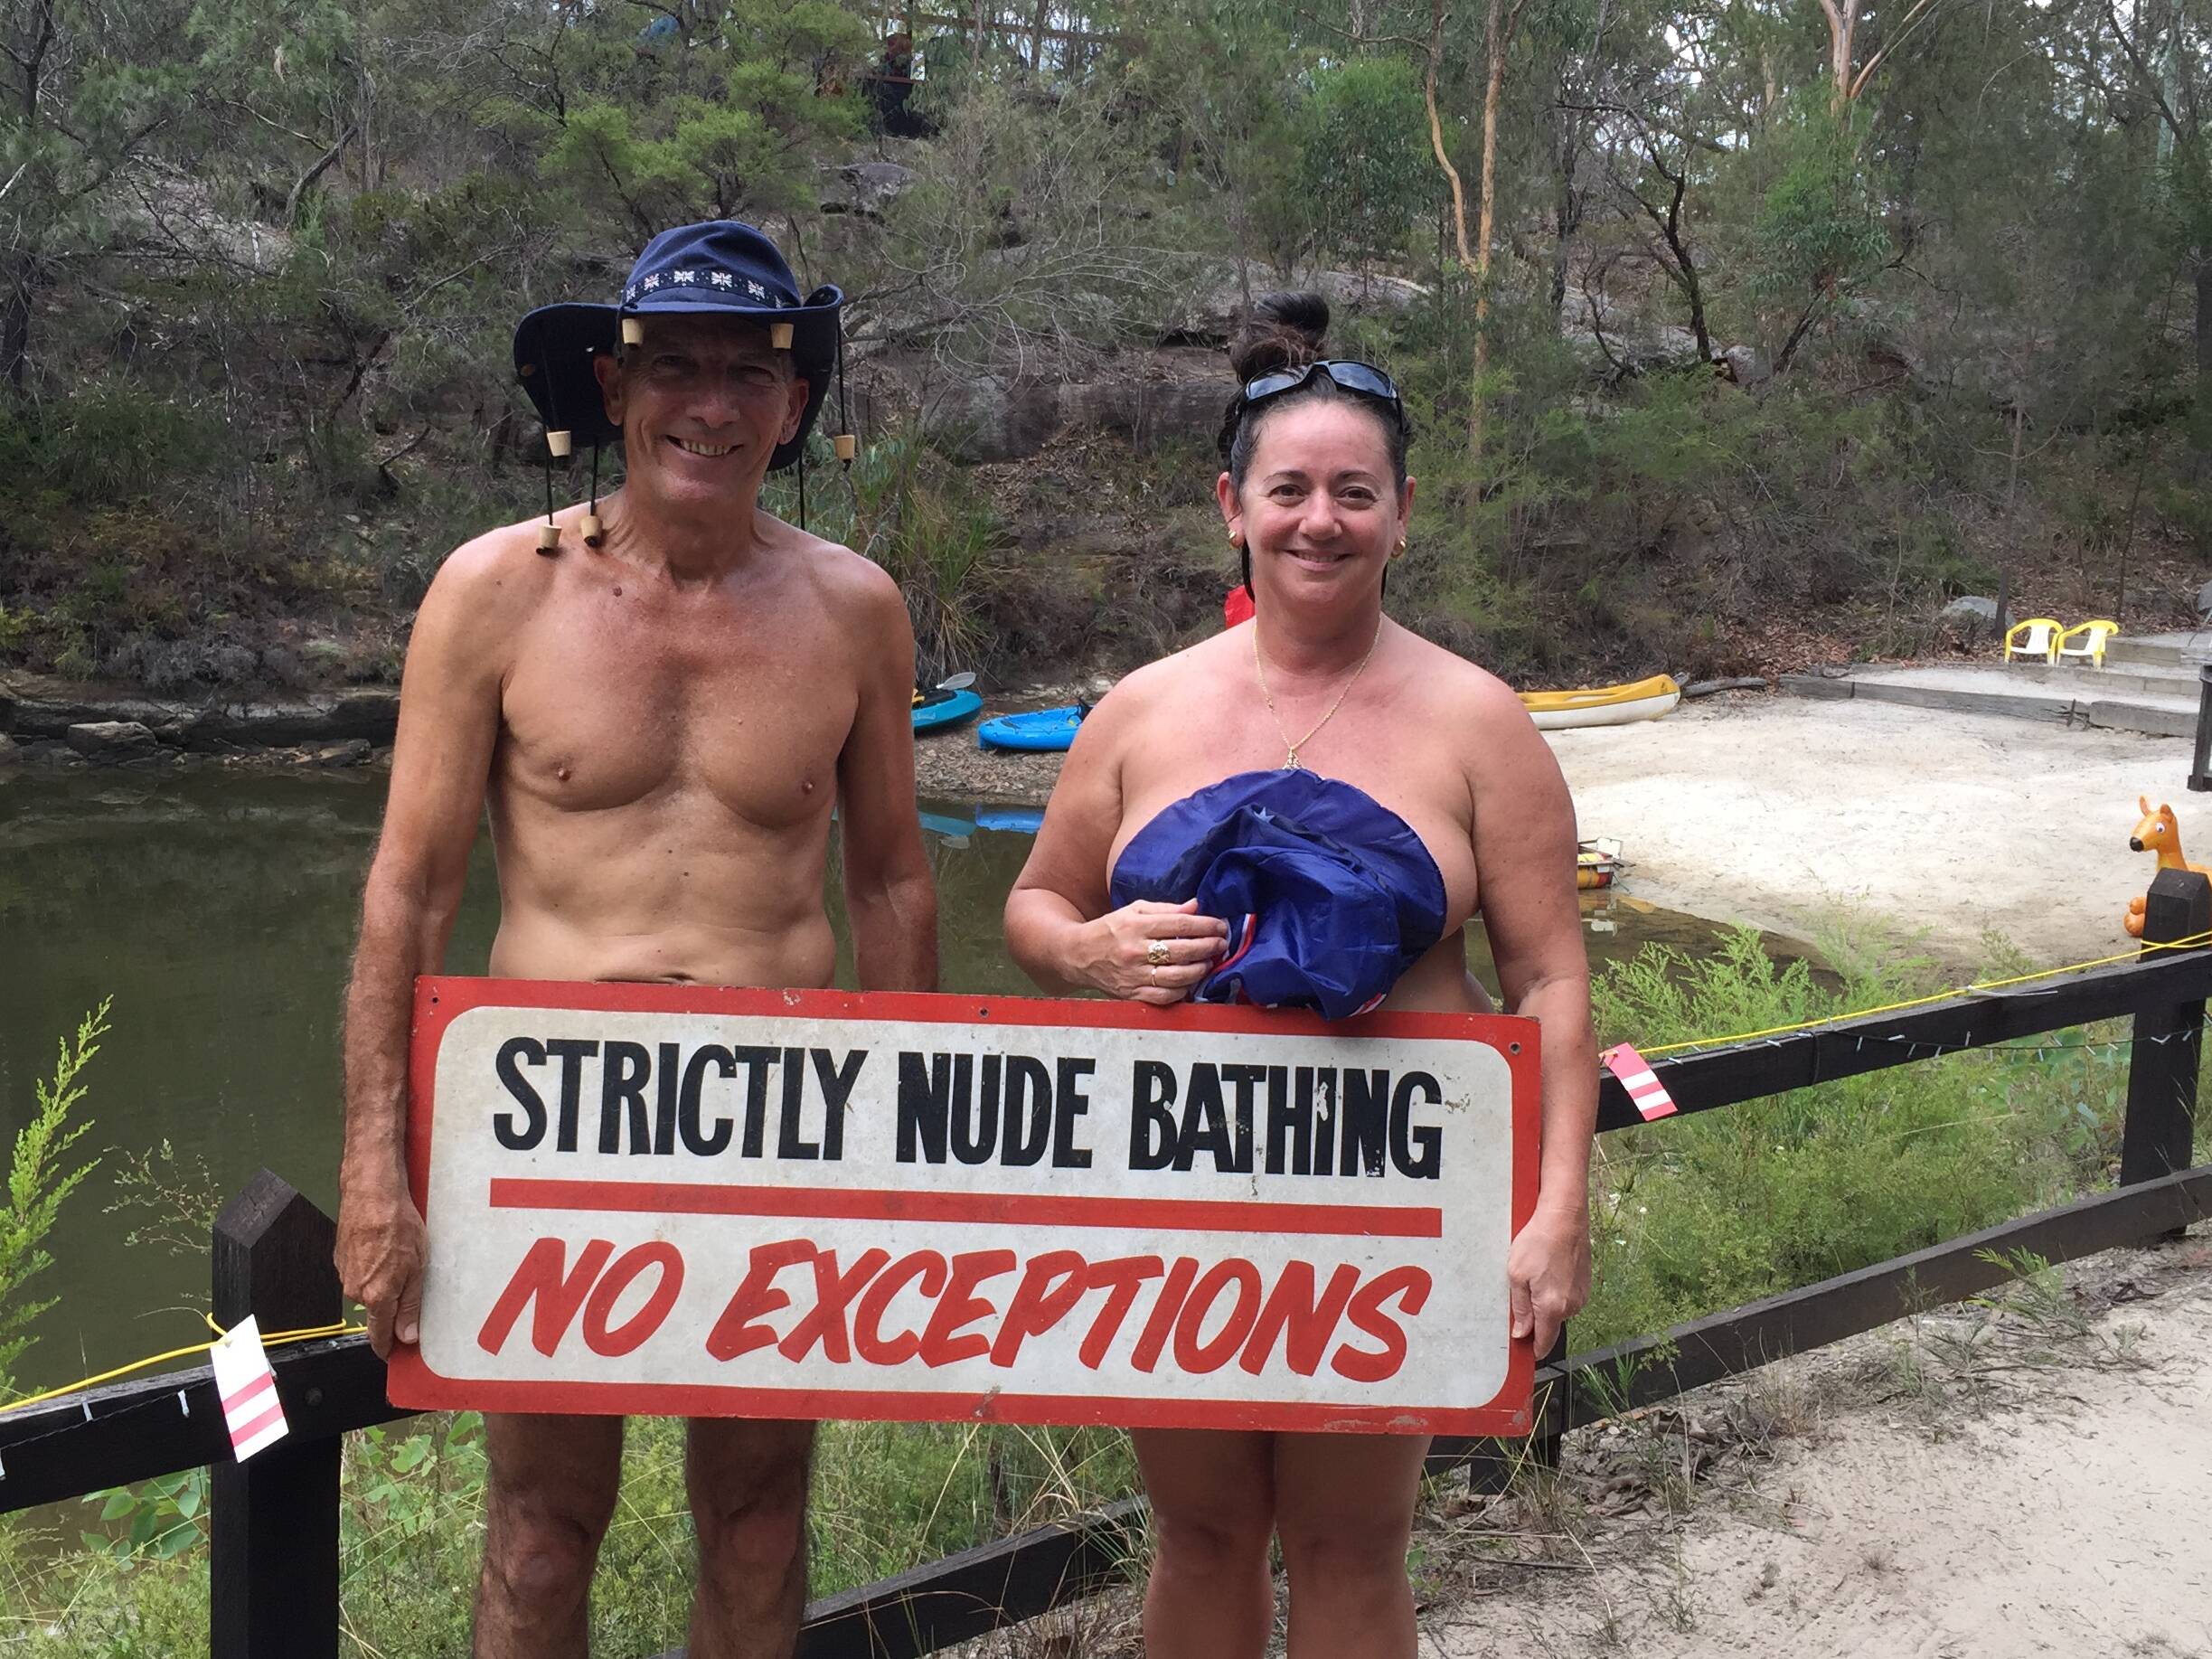 christina raimo recommends sex at nudist camp pic